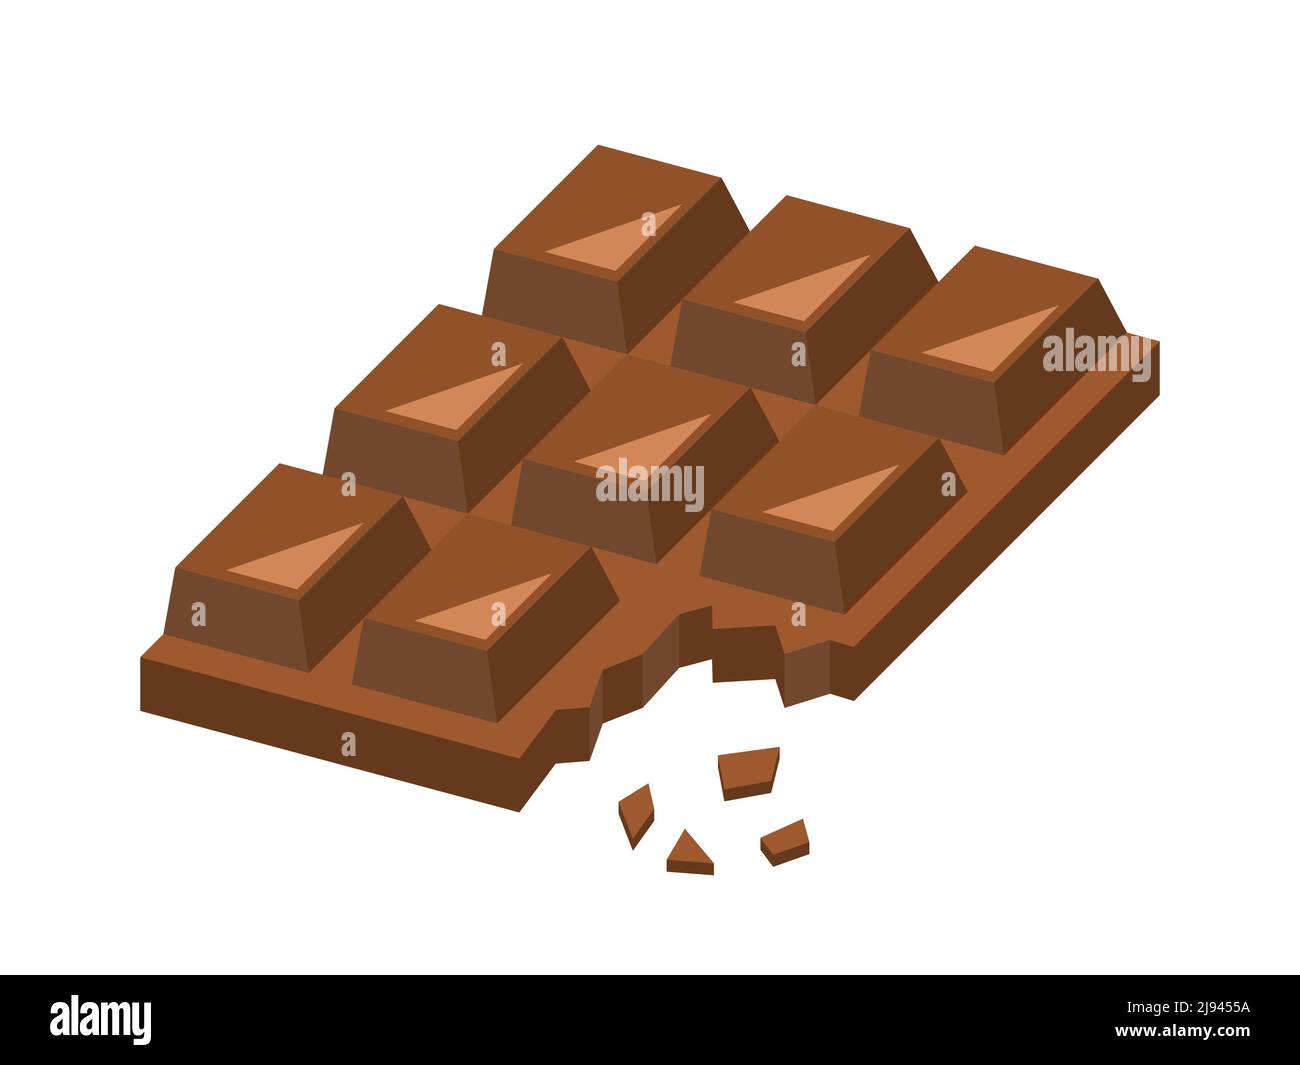 Chocolate bar with crumbs. Snack food. Energy chocolate bar with small pieces. Bitten wilk chocolate with one corner broken off. Cacao food product. Stock Vector